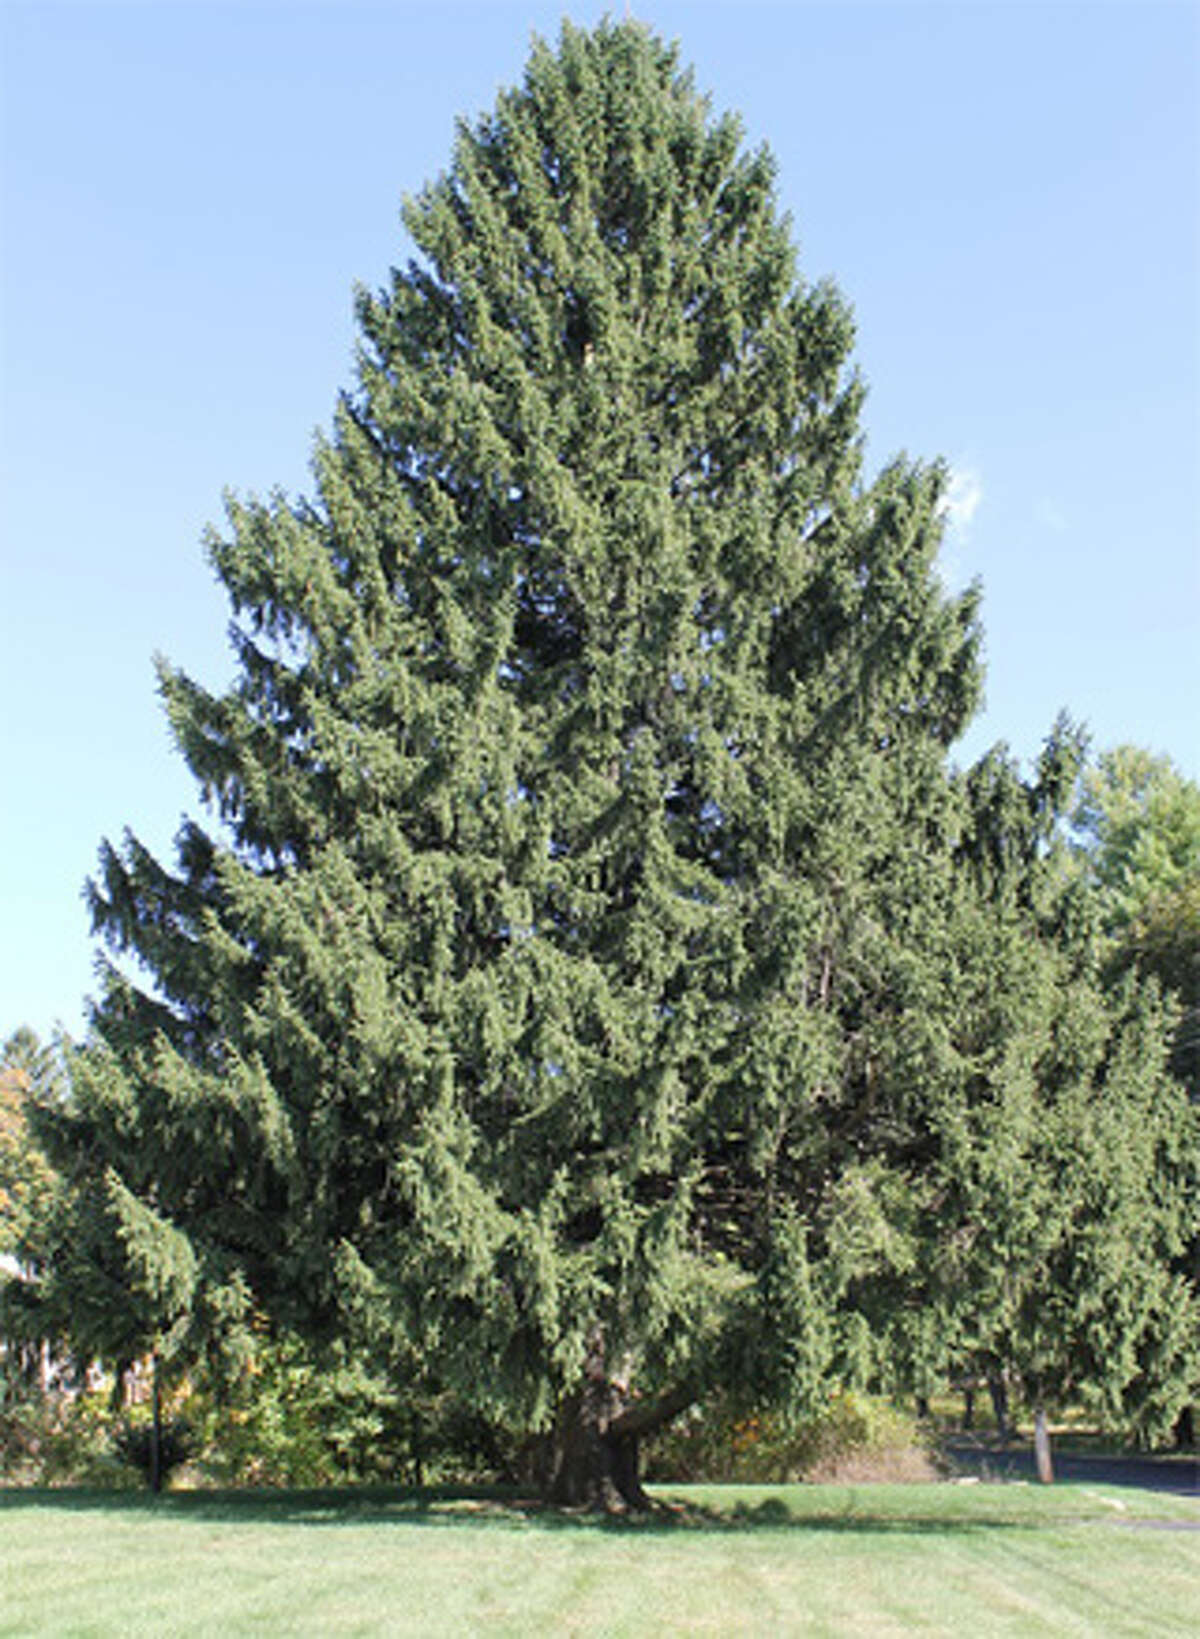 The Norway spruce in the Vargoshe front yard on Kazo Drive before it was cut down.